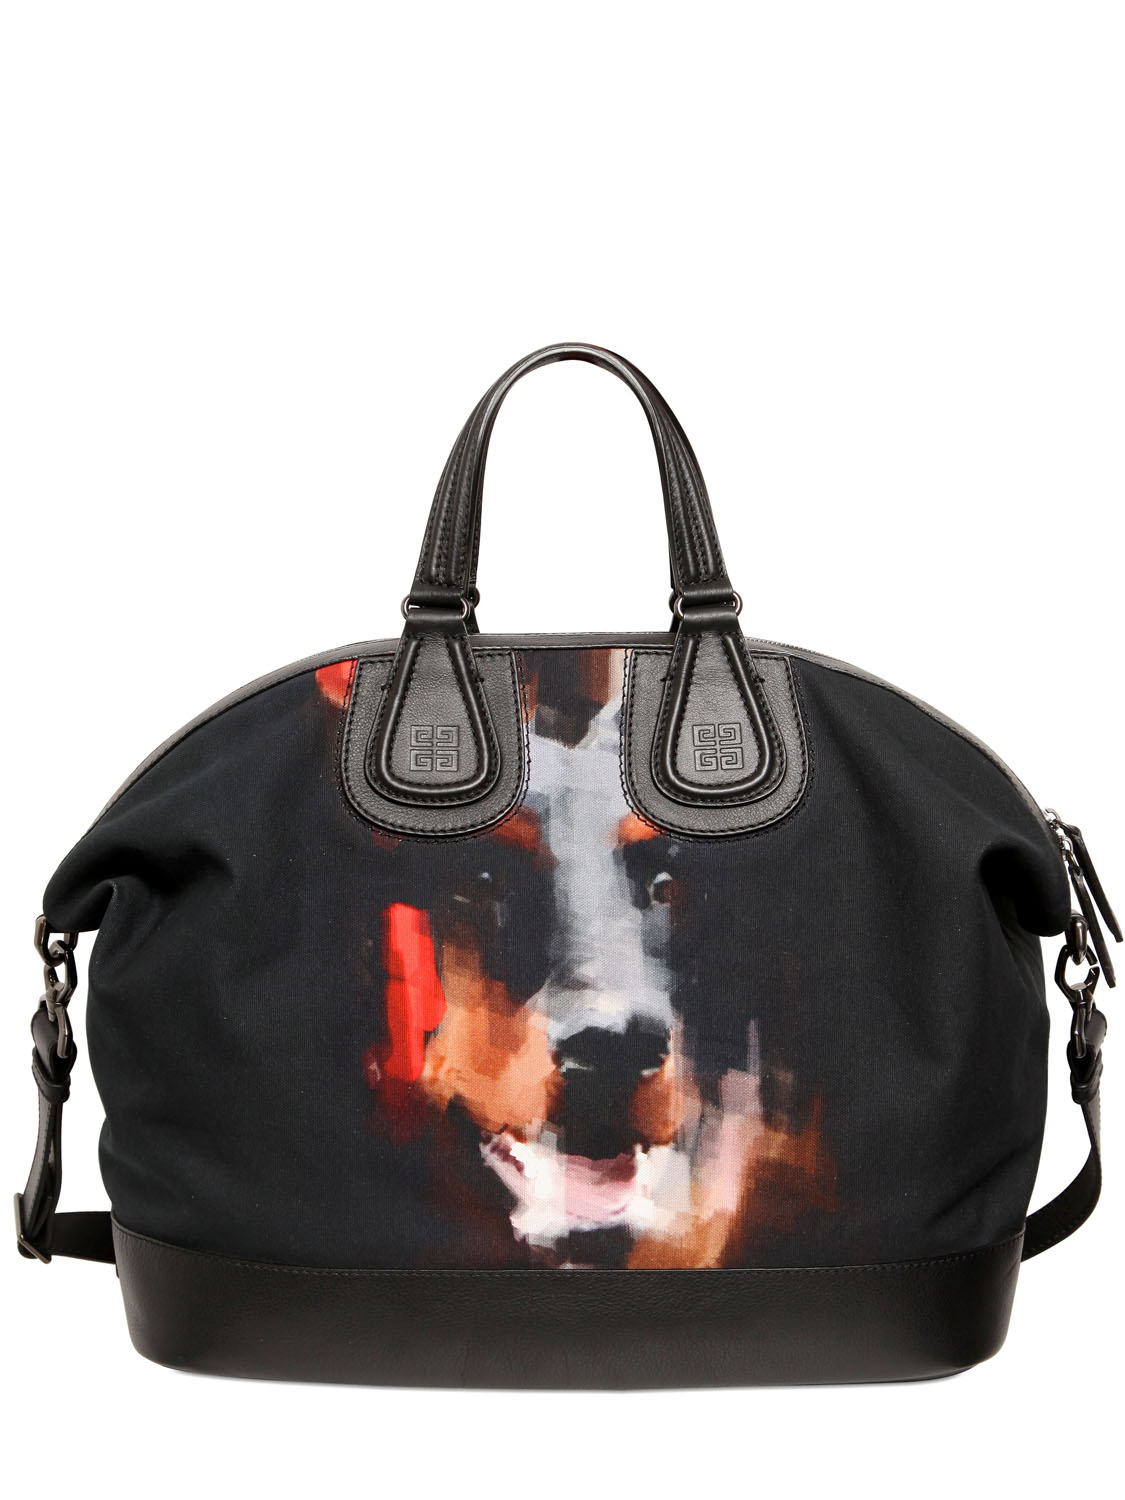 Givenchy Canvas & Leather Nightingale Bag in Black for Men | Lyst